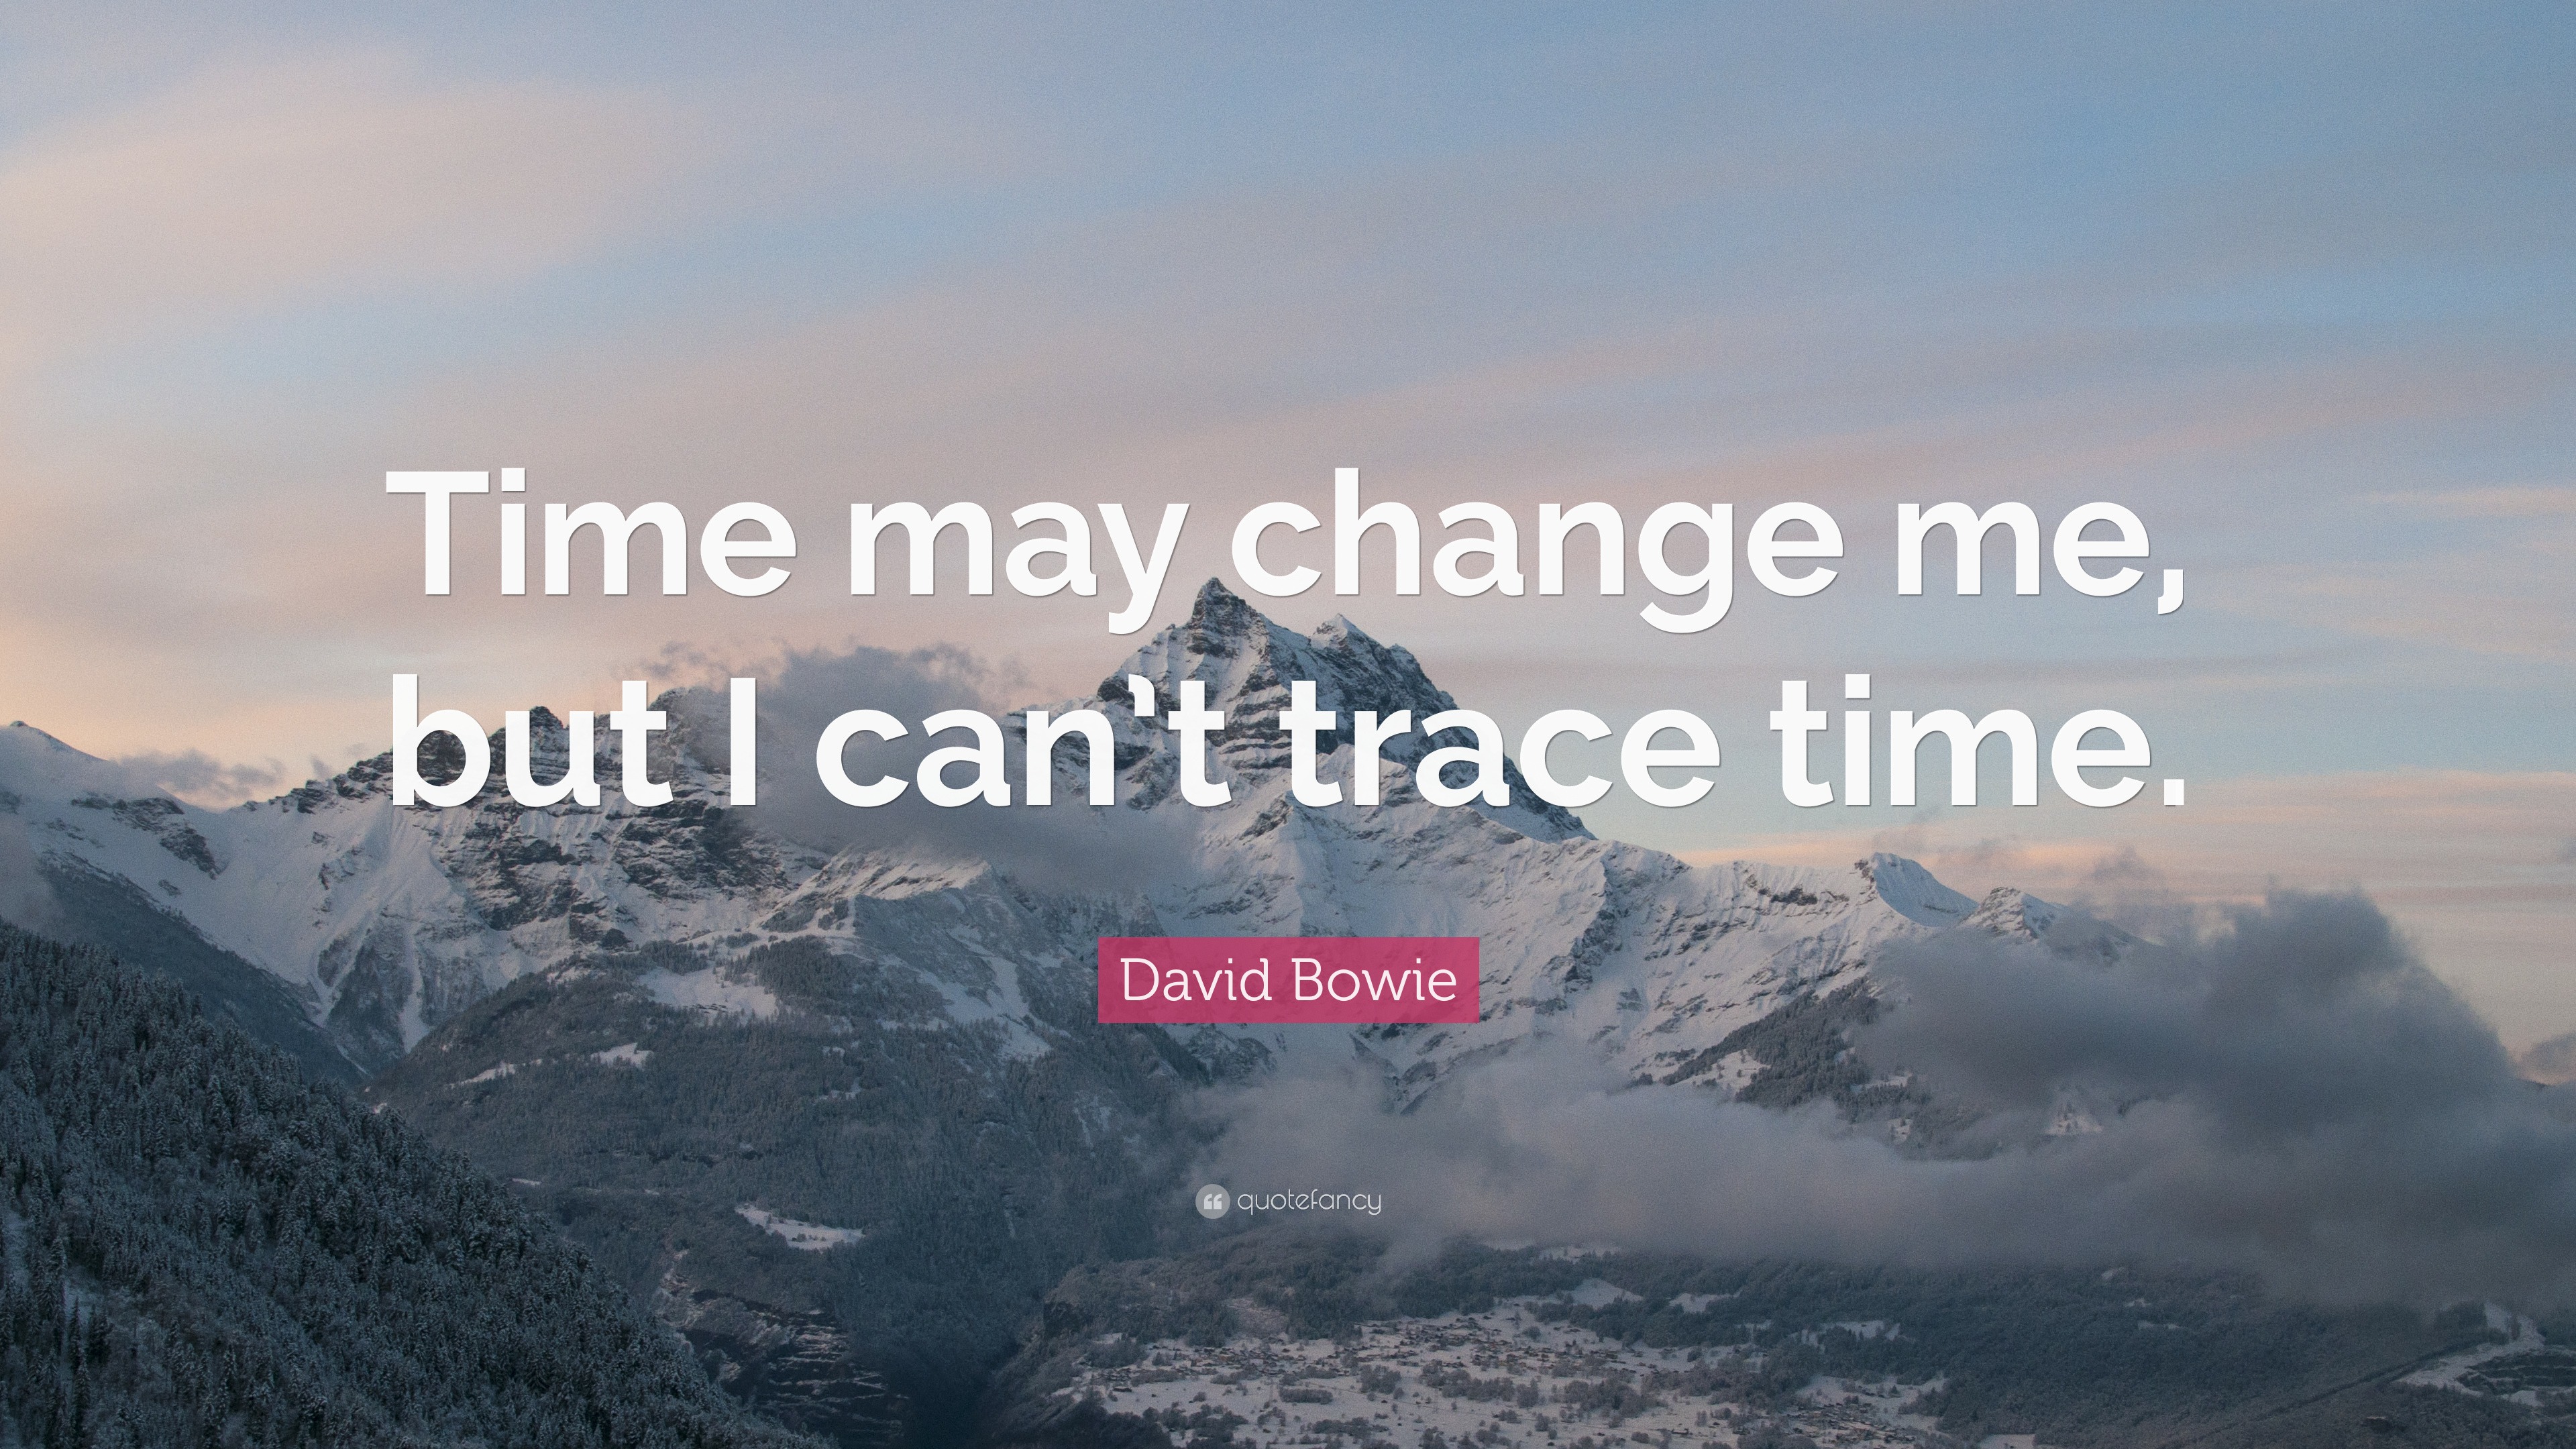 David Bowie Quote: “Time may me, but I